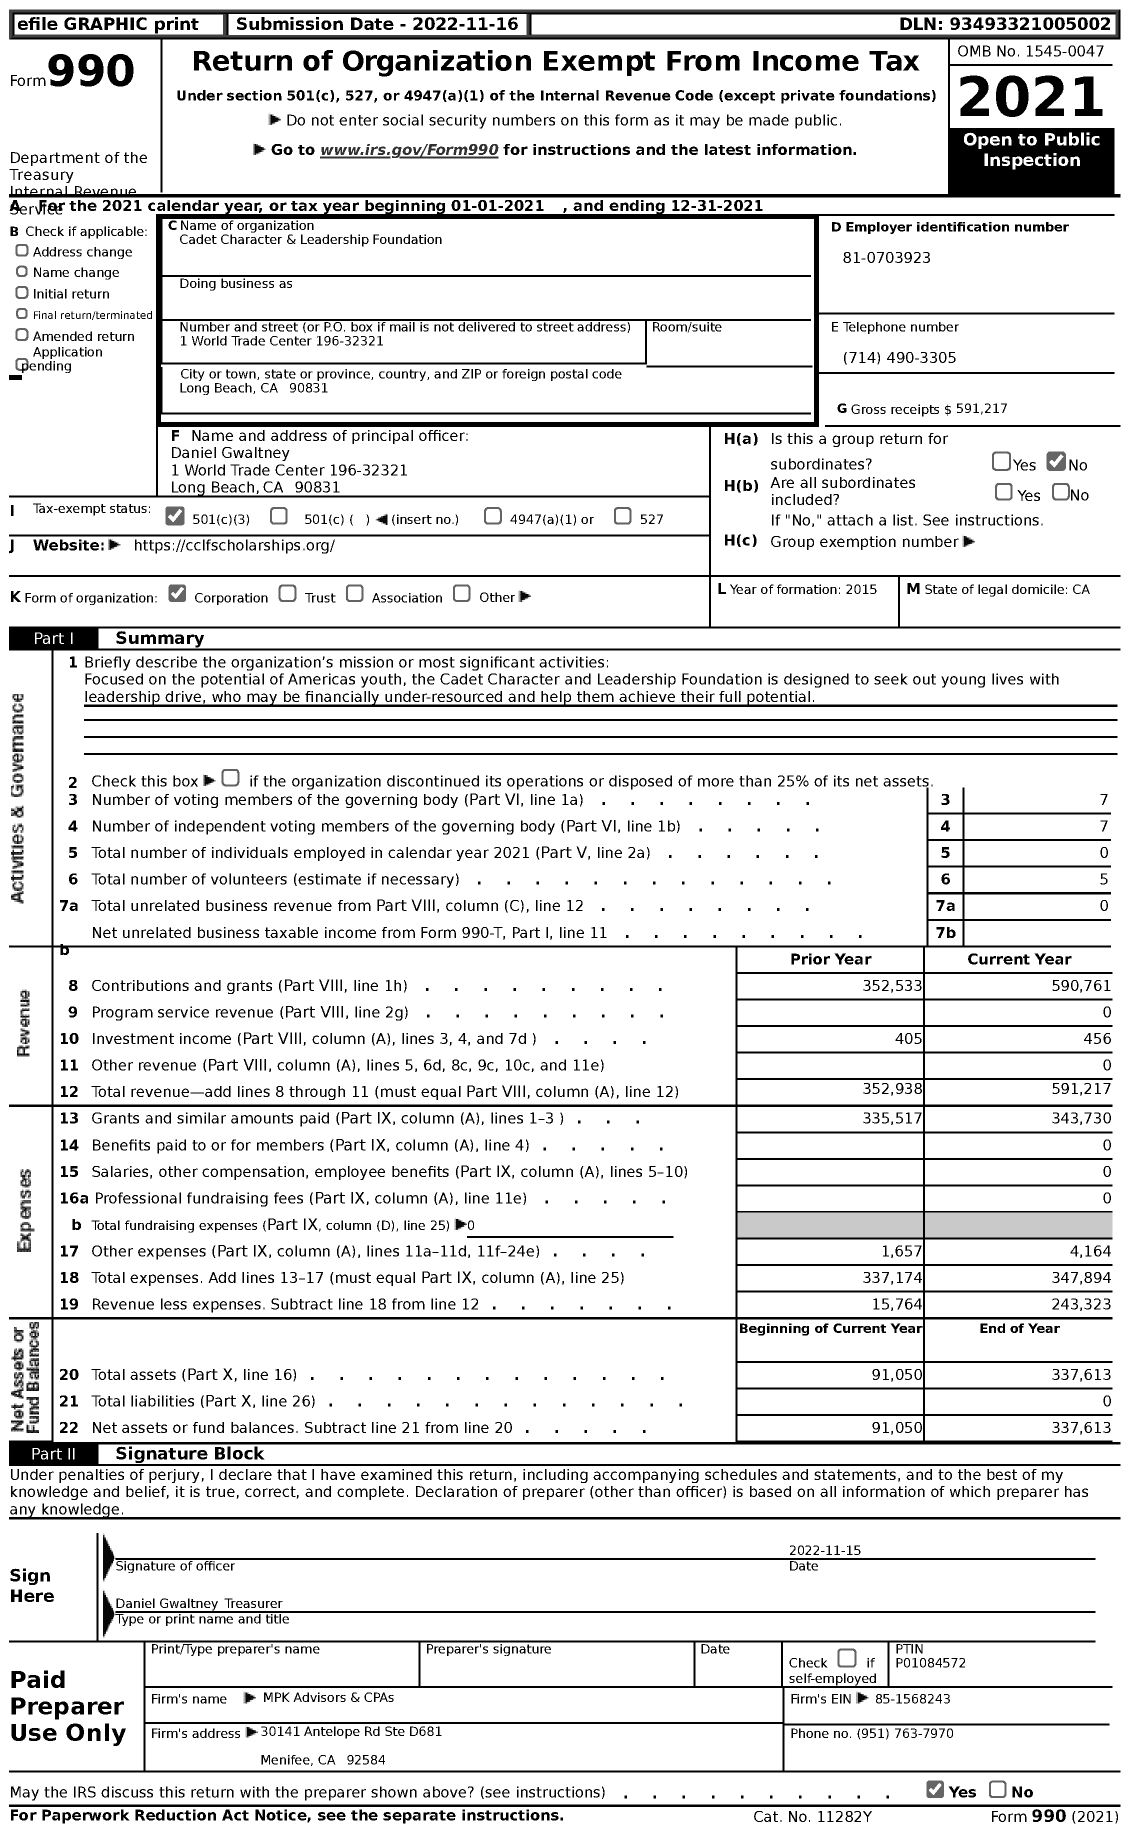 Image of first page of 2021 Form 990 for Cadet Character & Leadership Foundation